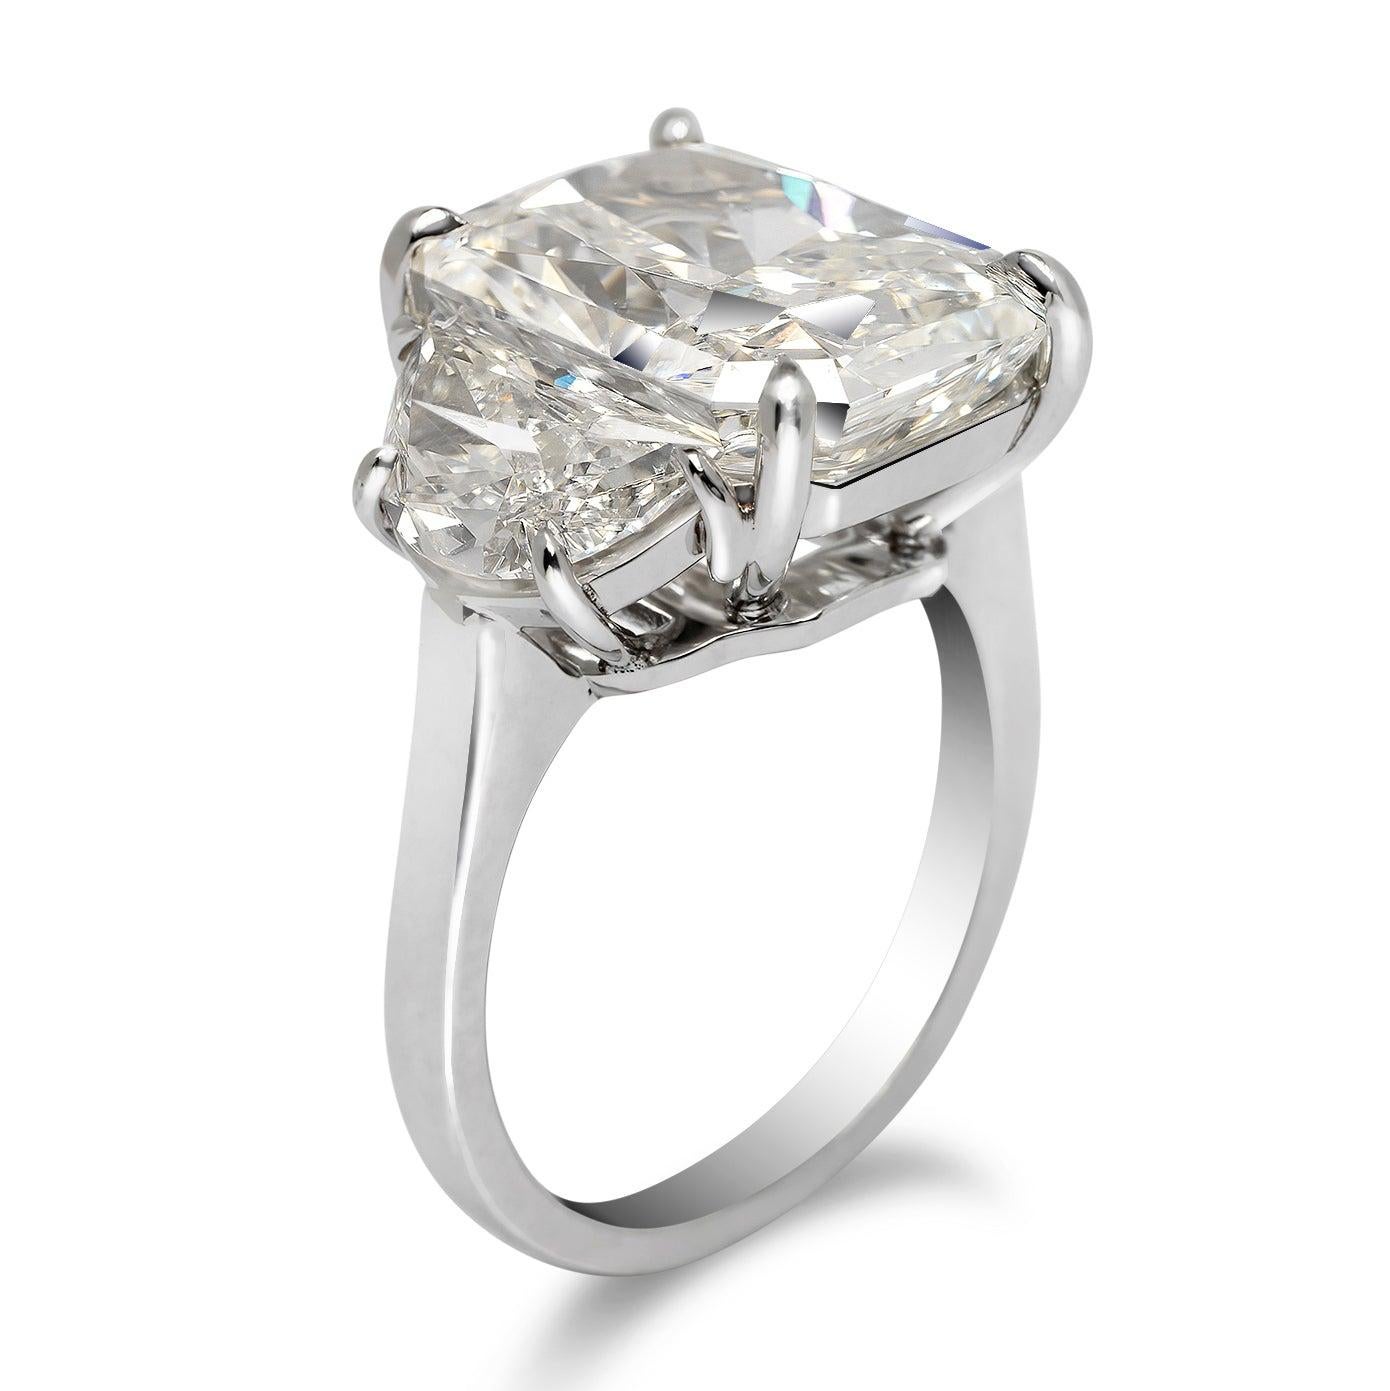 11 Carat Radiant Cut Diamond Engagement Ring GIA Certified K SI1 In New Condition For Sale In New York, NY